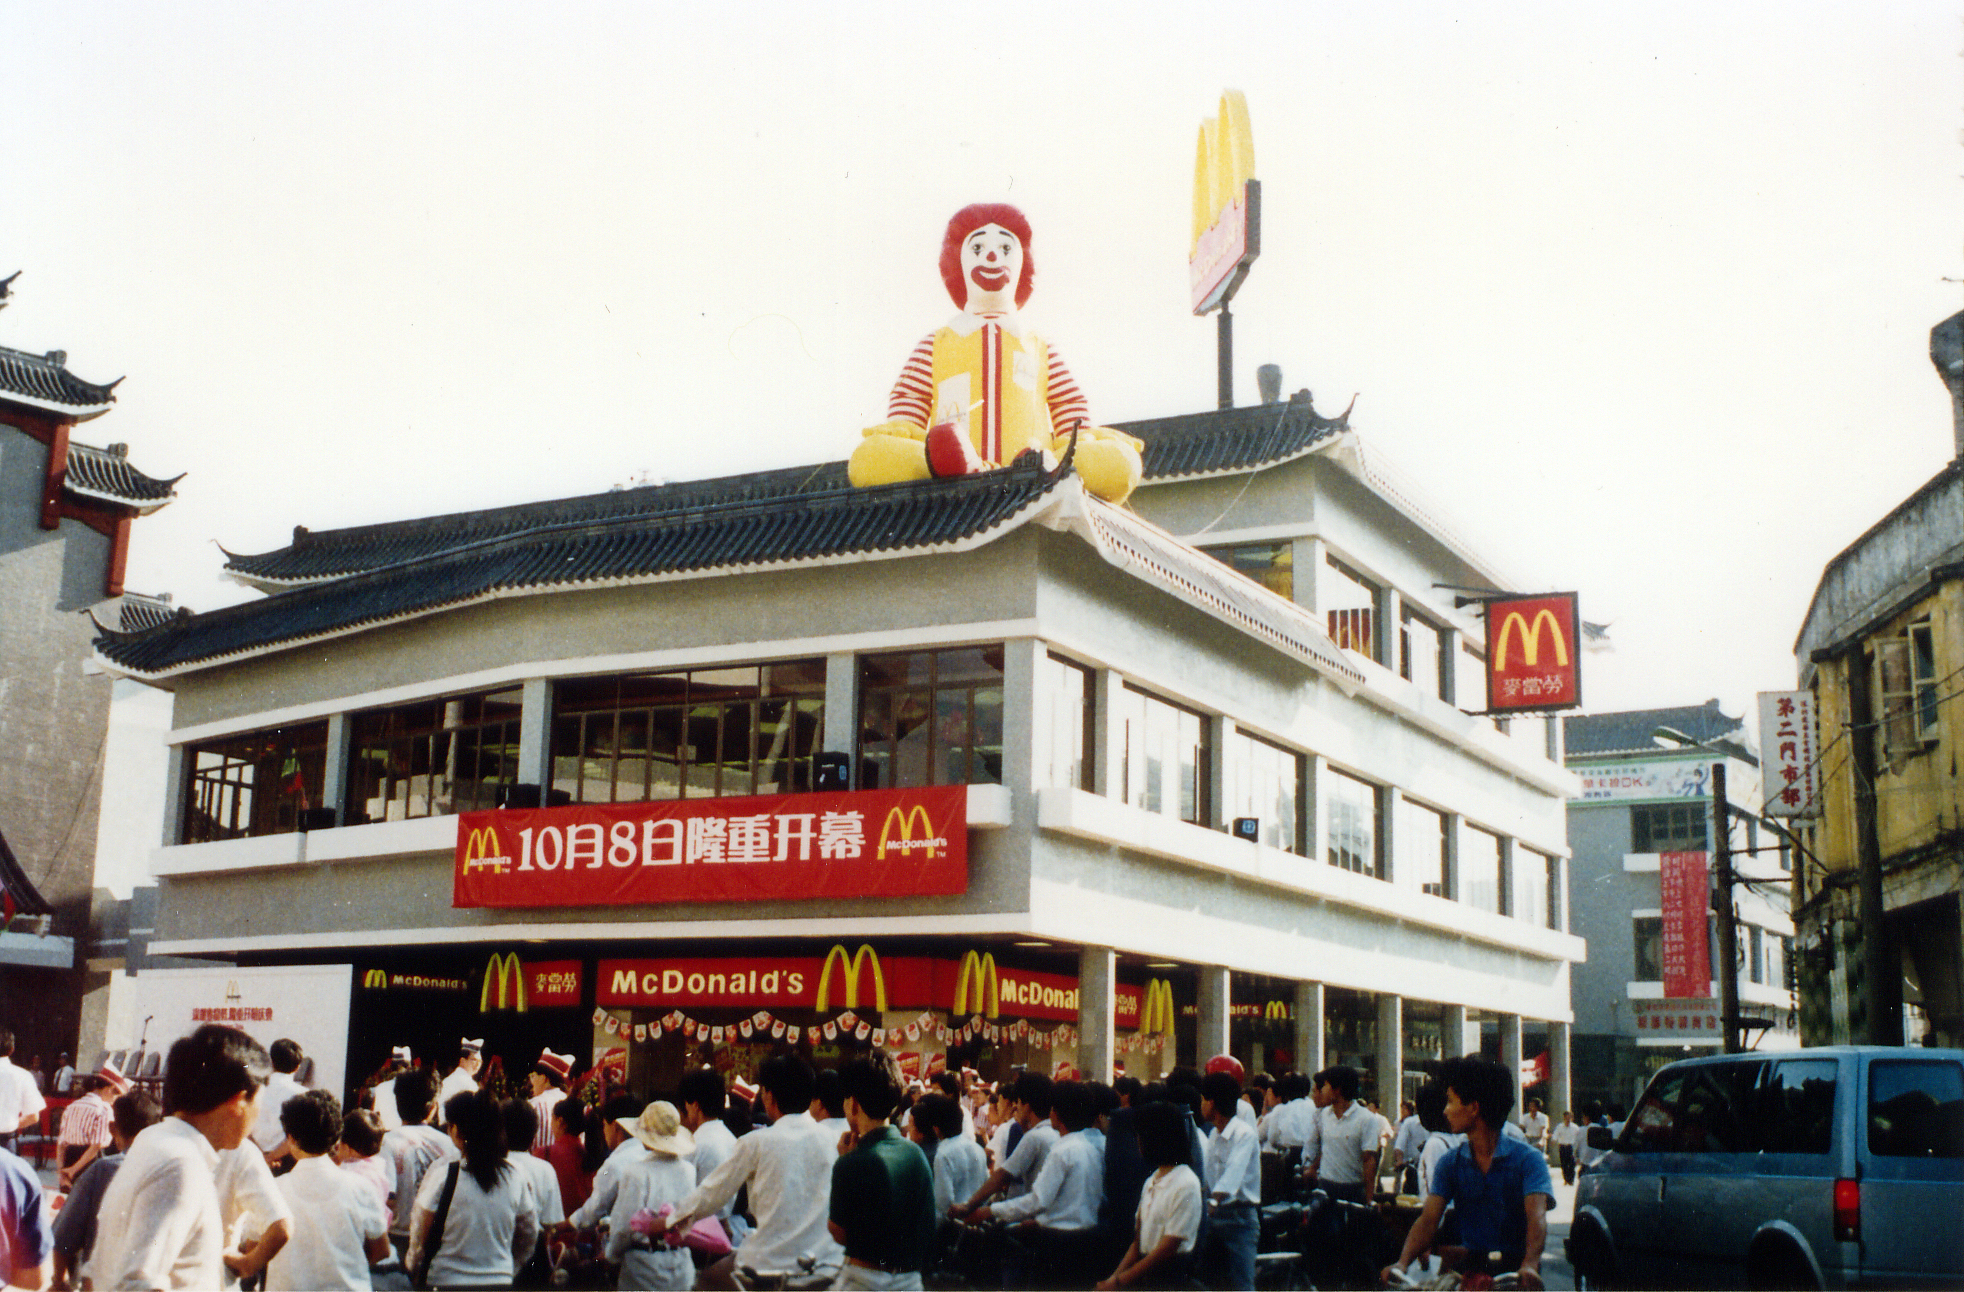 PHOTO: This photo shows the first McDonald's opened in Shenzhen, China.